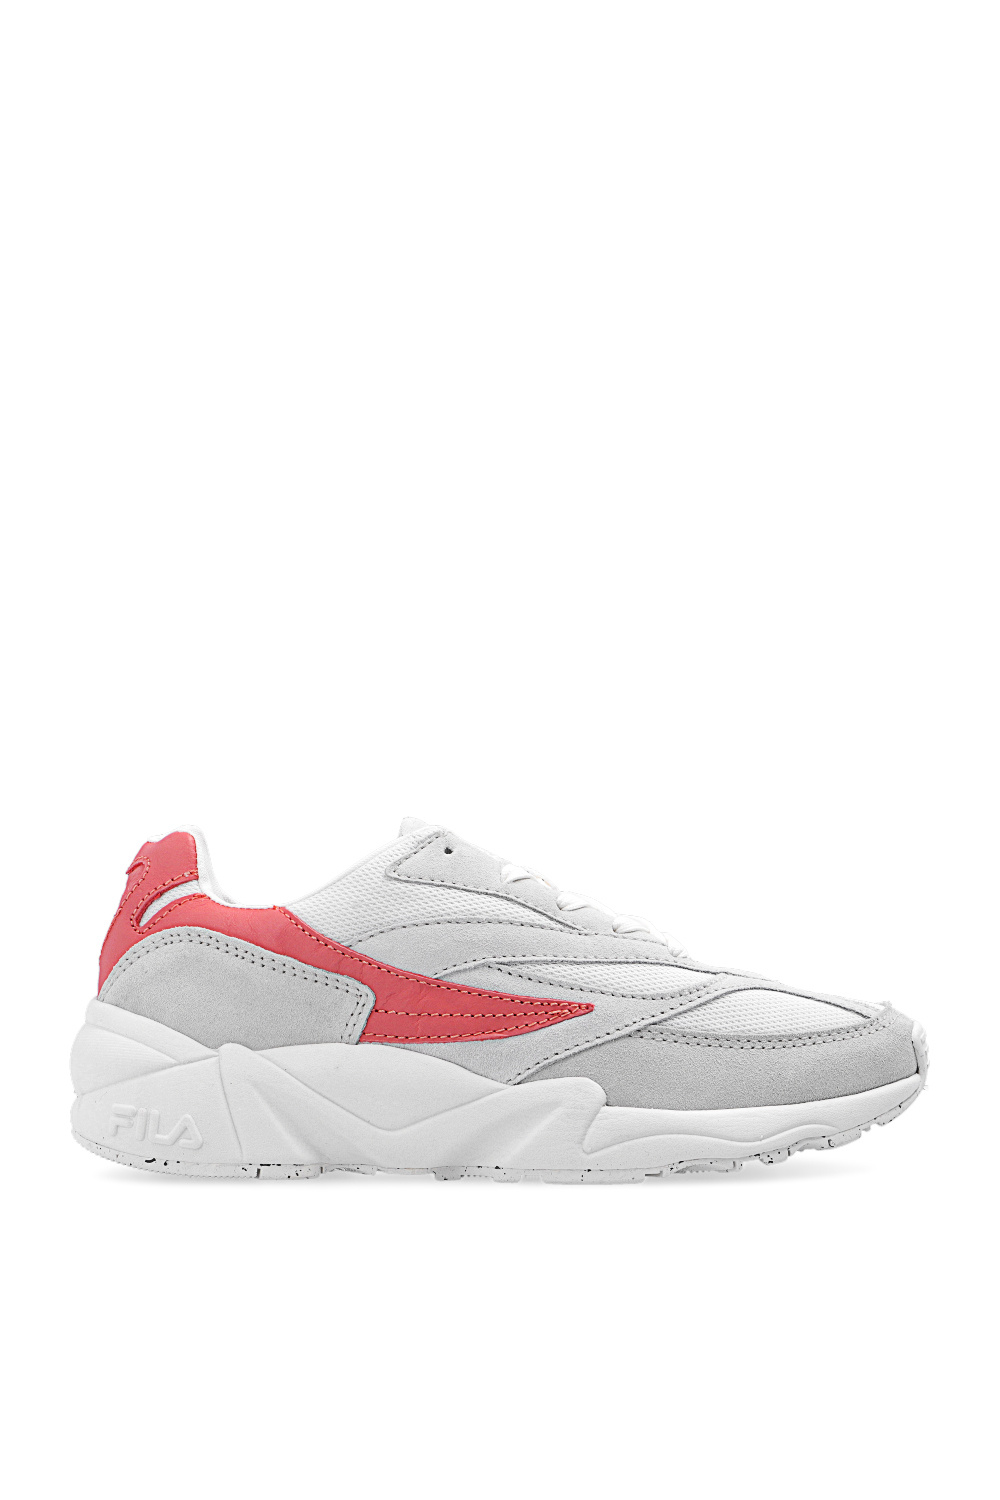 Fila Disruptor Ii Exp Womens Shoes Size 10, Color: White/Grey 